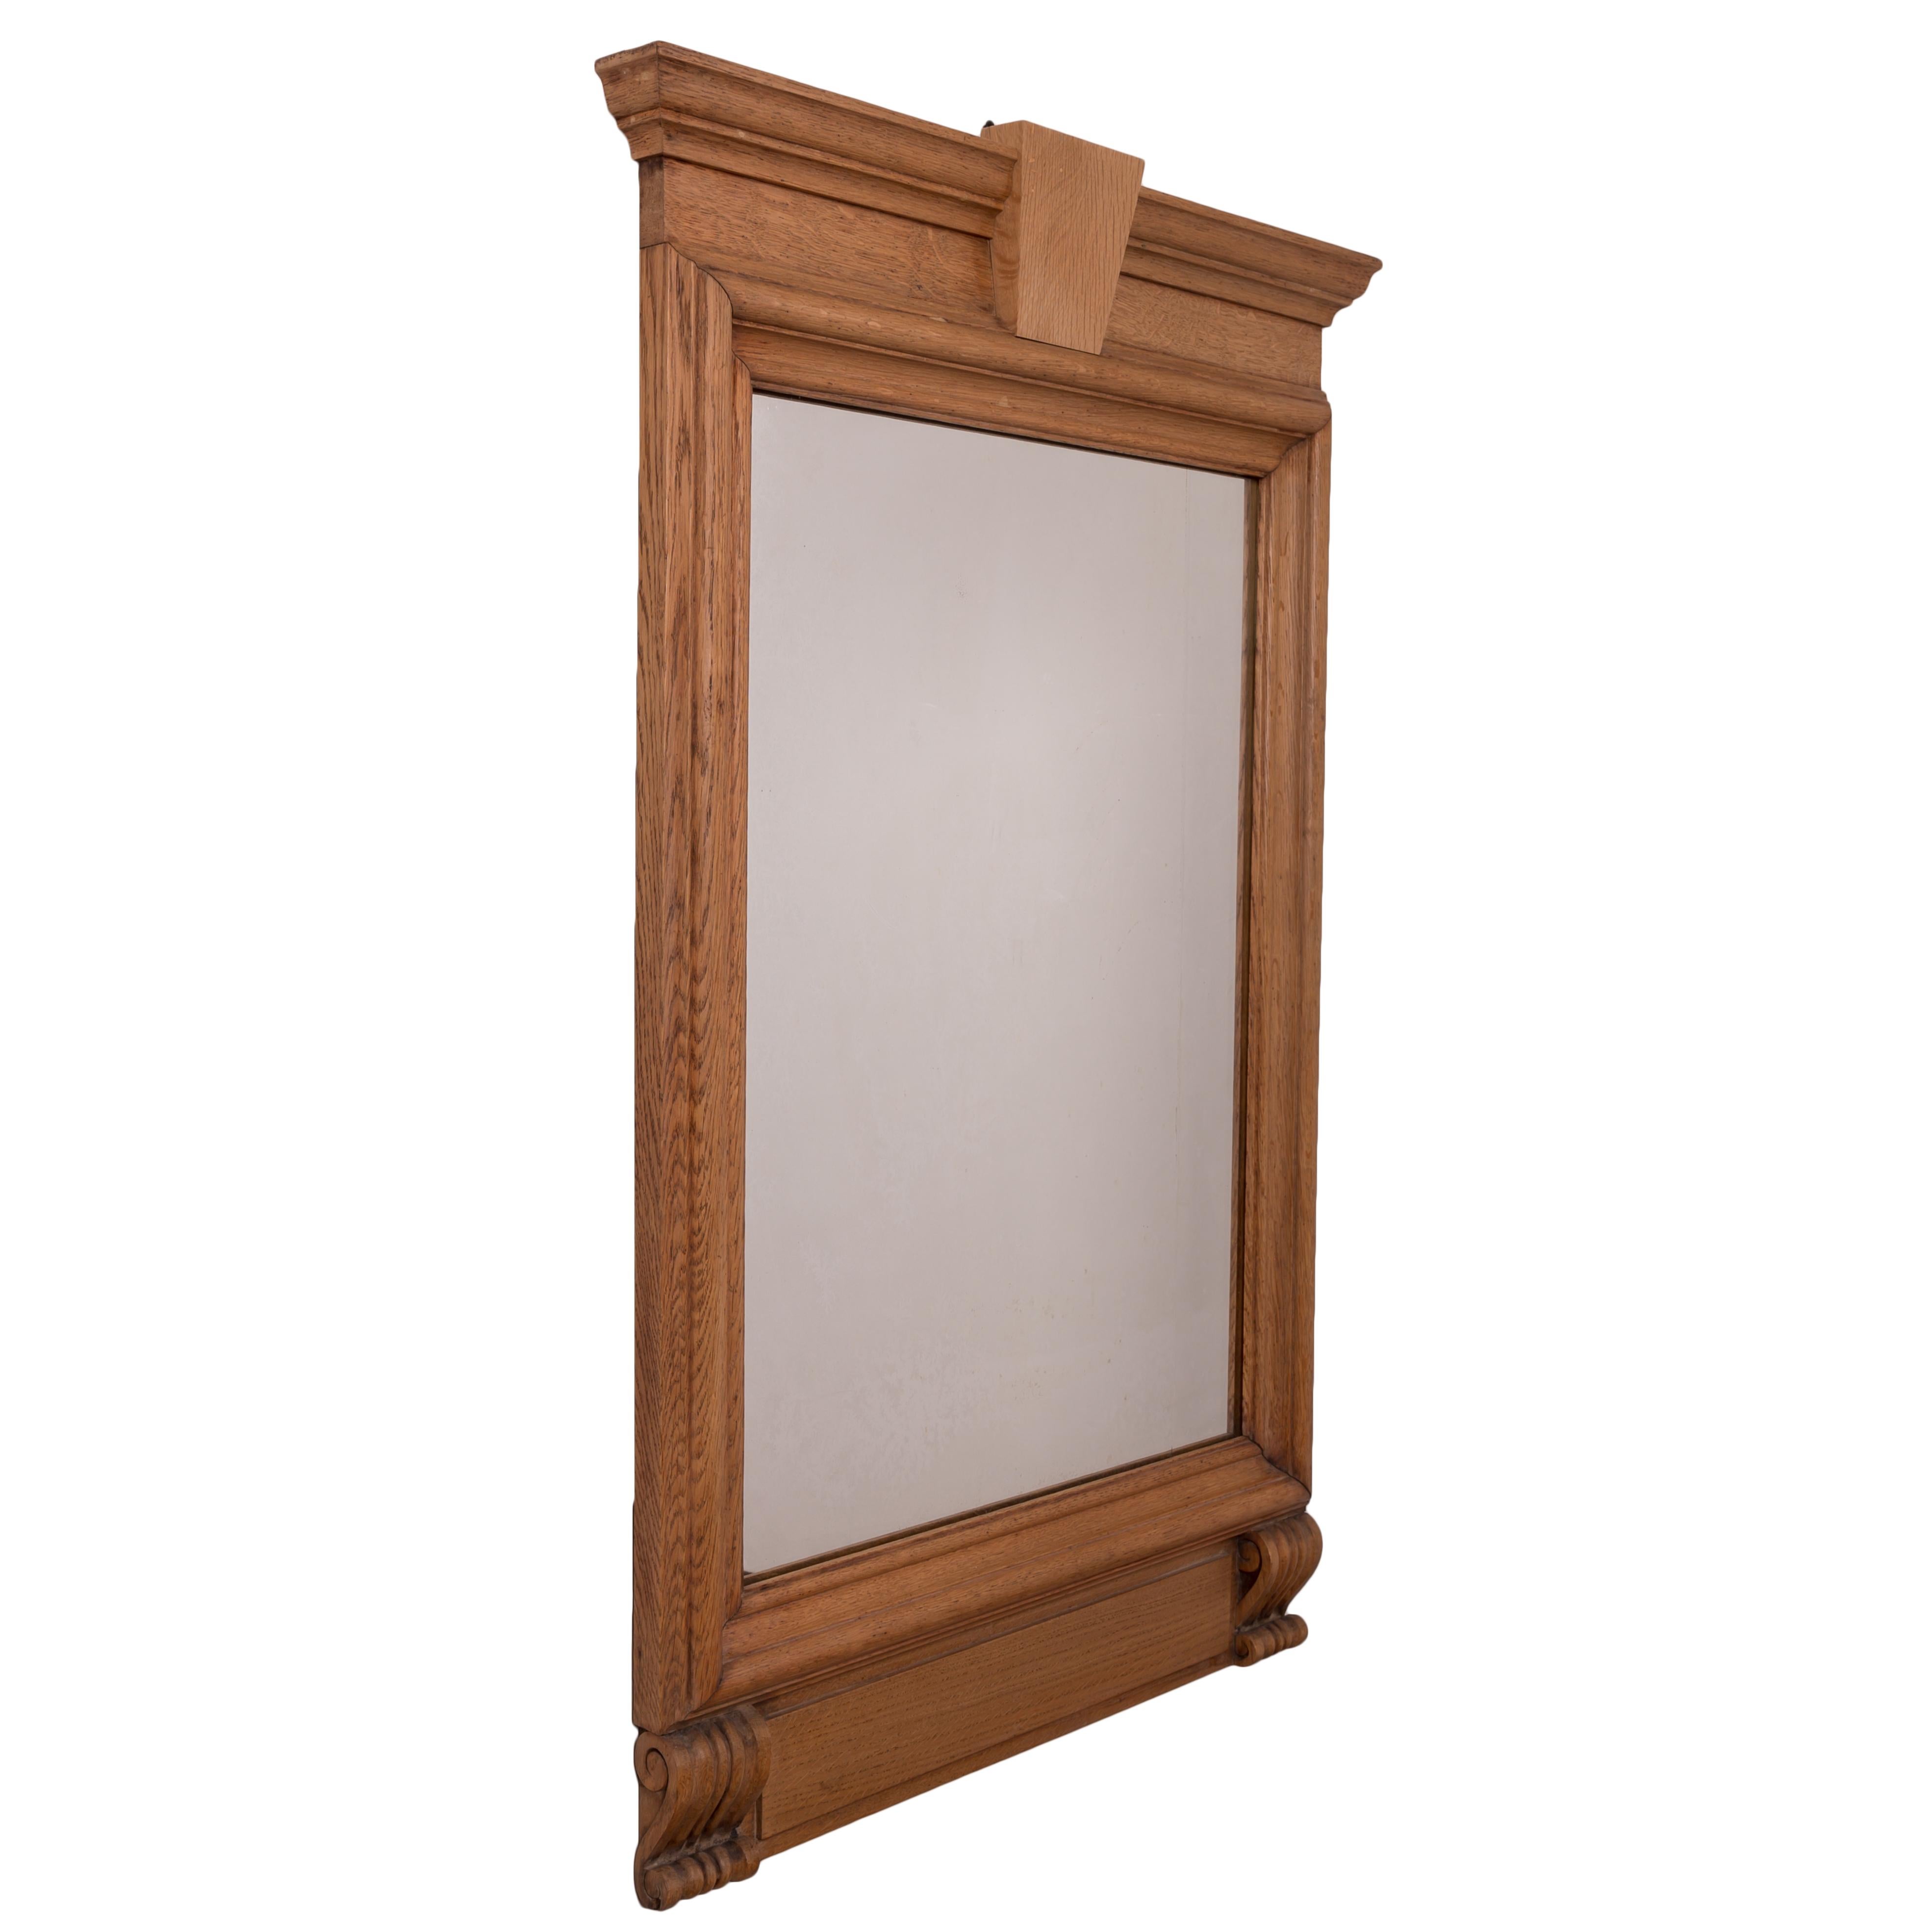 French Neoclassical Style Limed Oak Trumeau Mirrors, 19th Century - A Pair In Good Condition For Sale In Savannah, GA